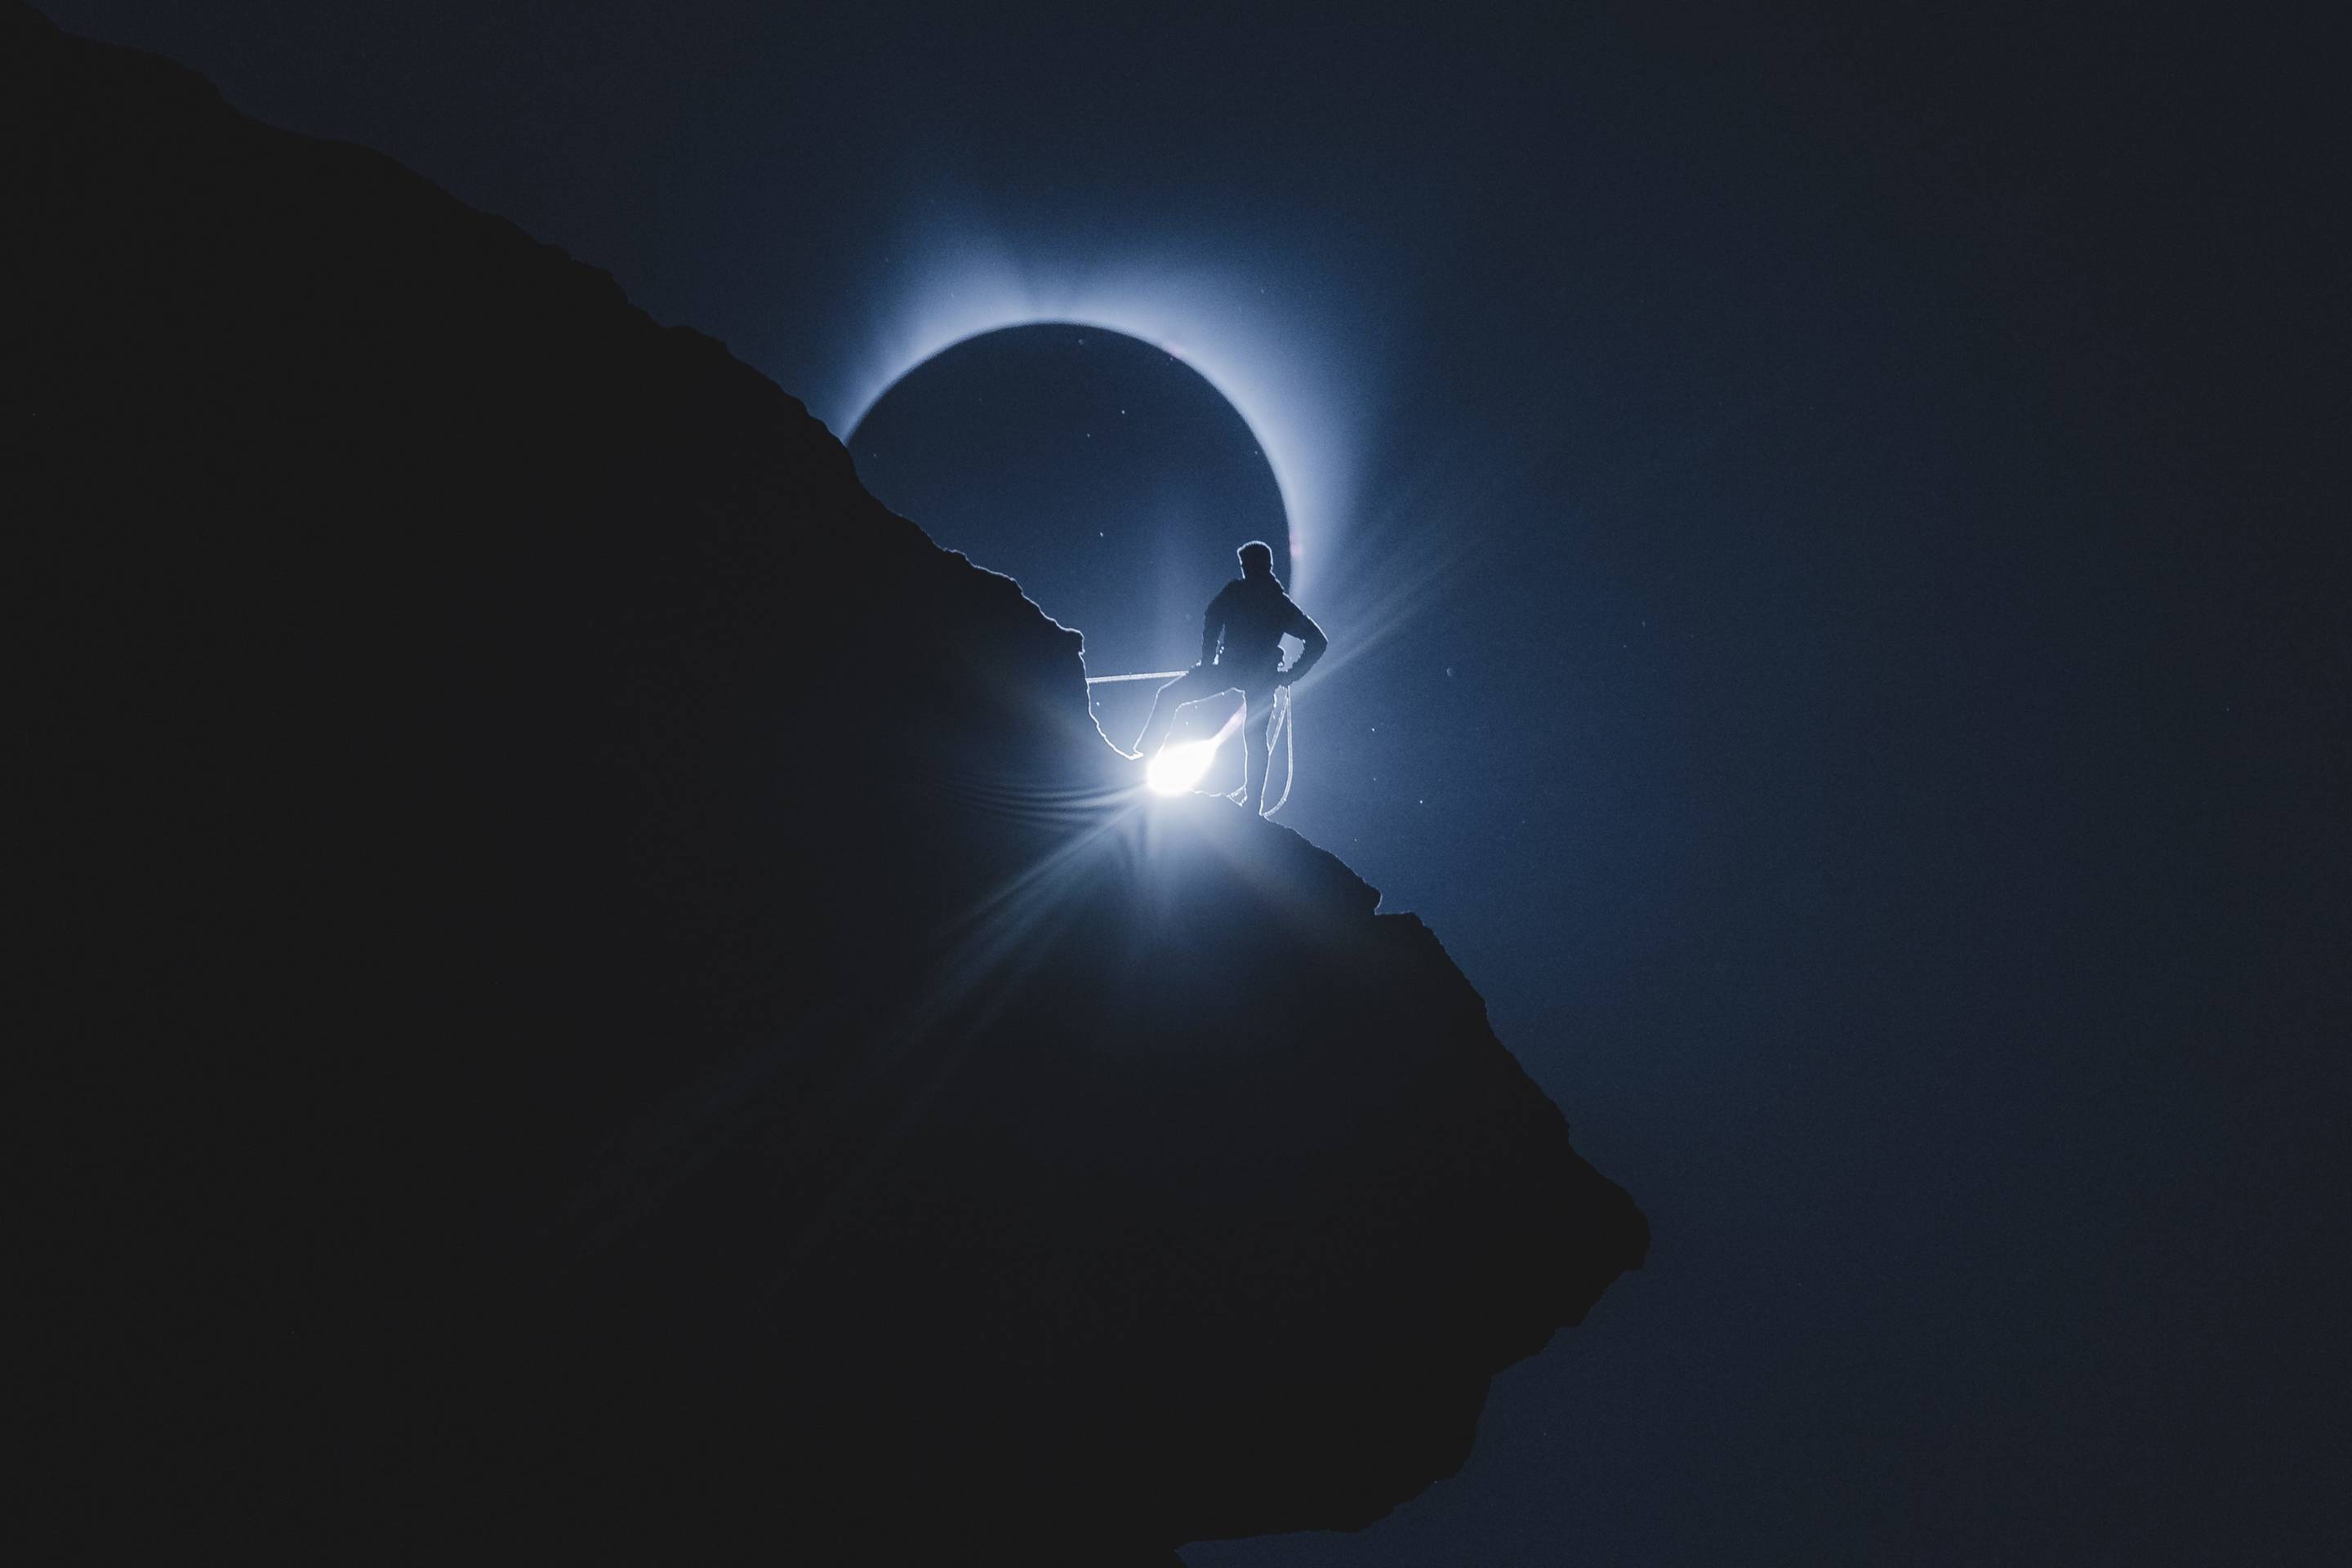 Viral photo of a climber in totality during the total solar eclipse of 2017. Photo taken at Smith Rock state park by Andrew Studer